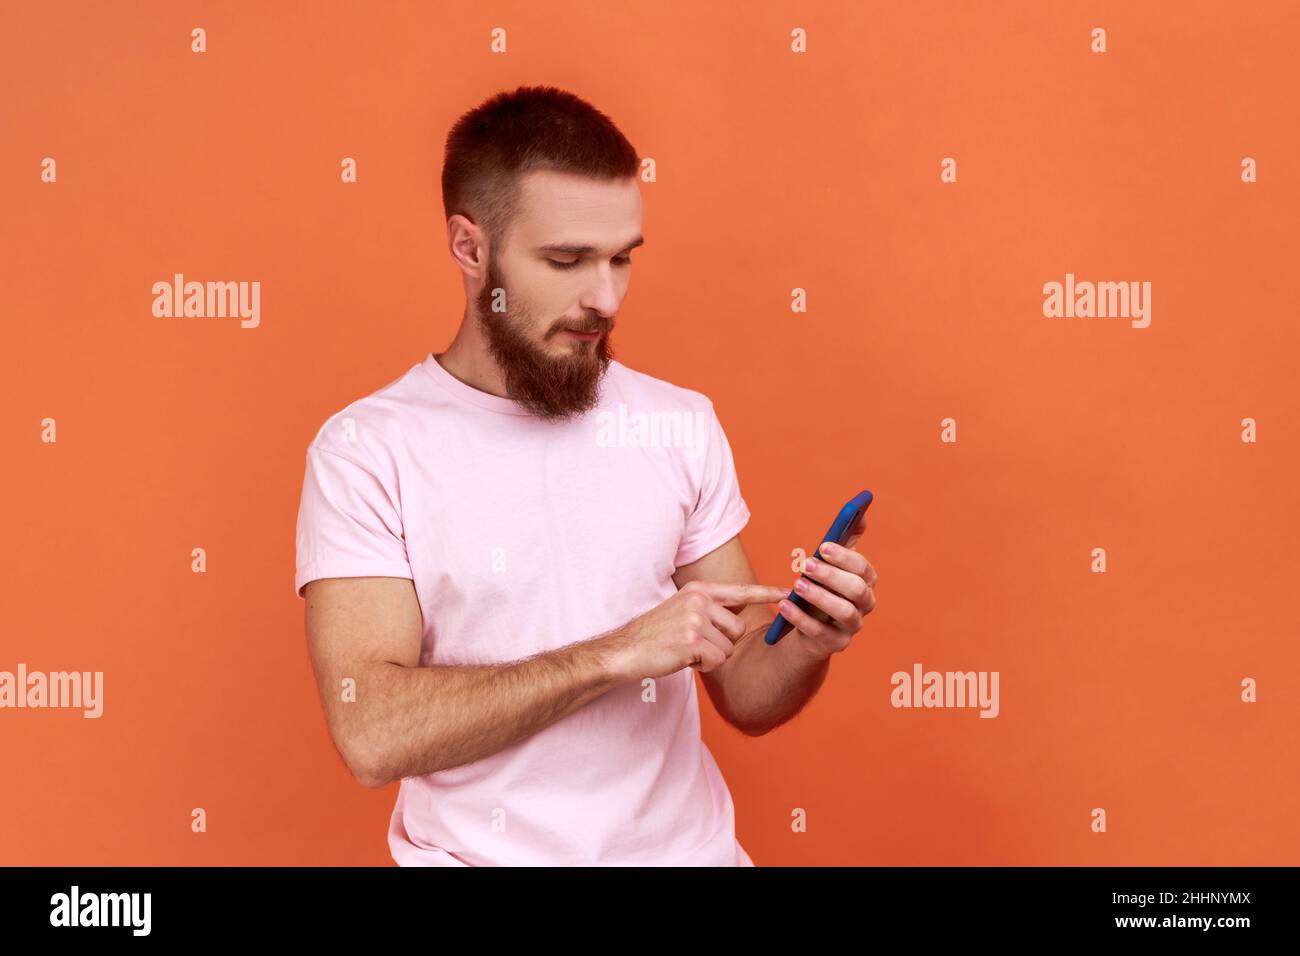 Portrait of bearded man scrolling online, texting message in social media on cell phone, using mobile network services, wearing pink T-shirt. Indoor studio shot isolated on orange background. Stock Photo